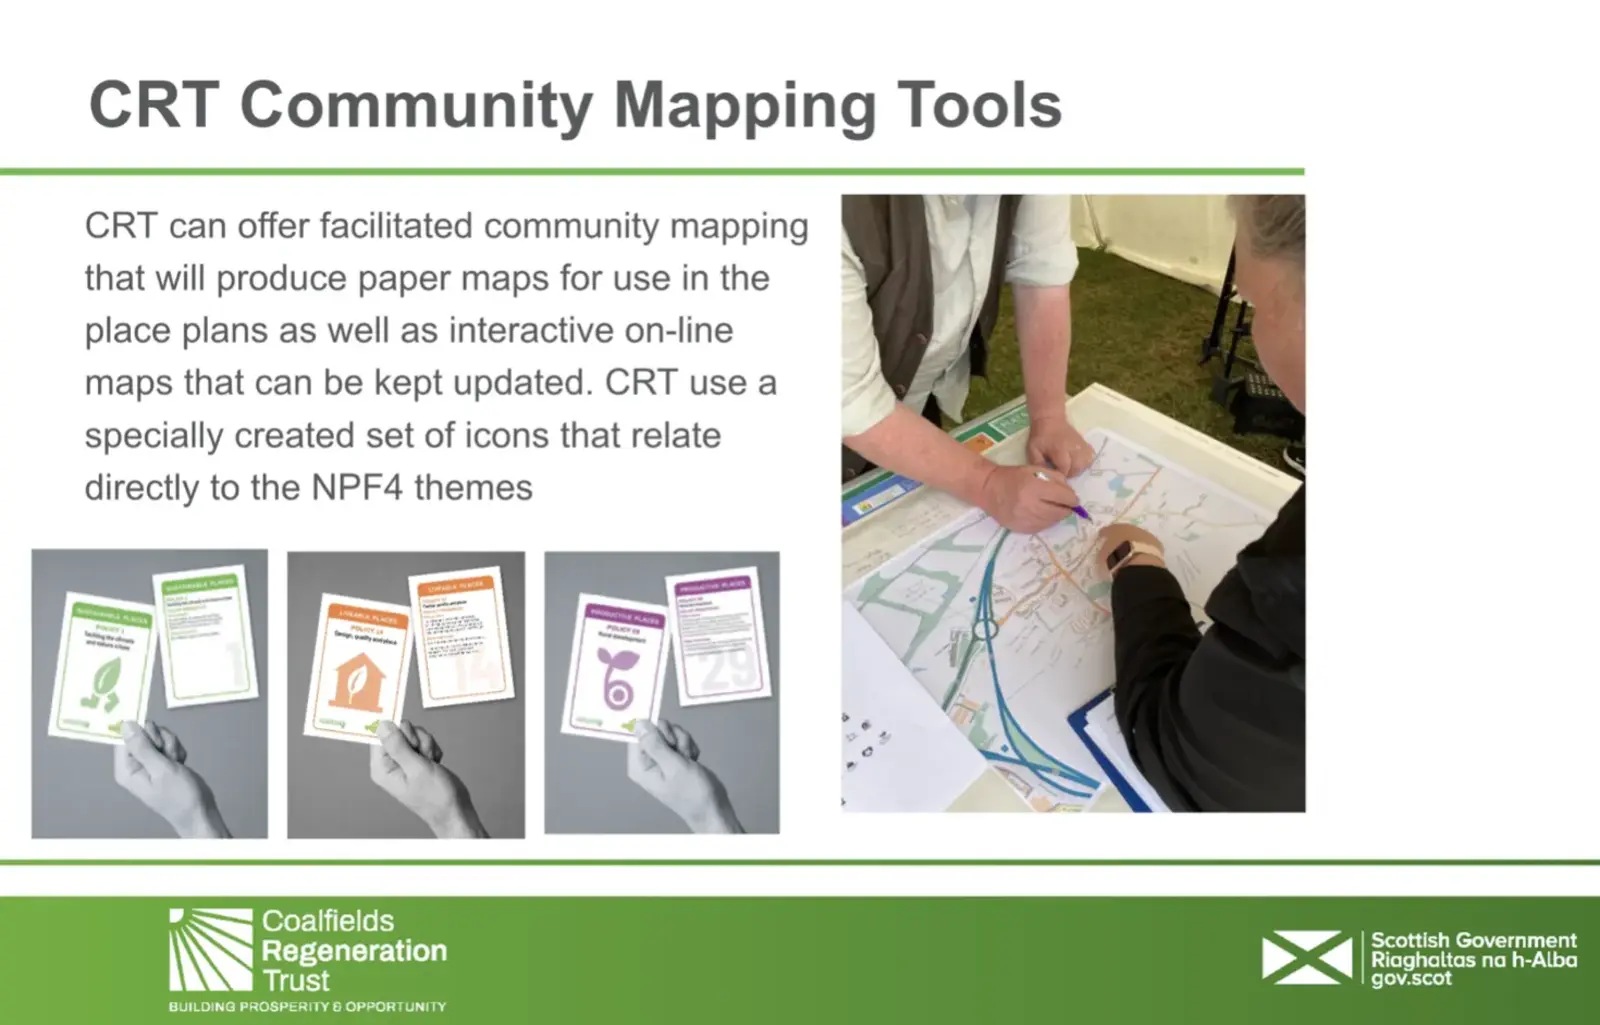 This NGO has brought Green Map icons and practices into their climate work